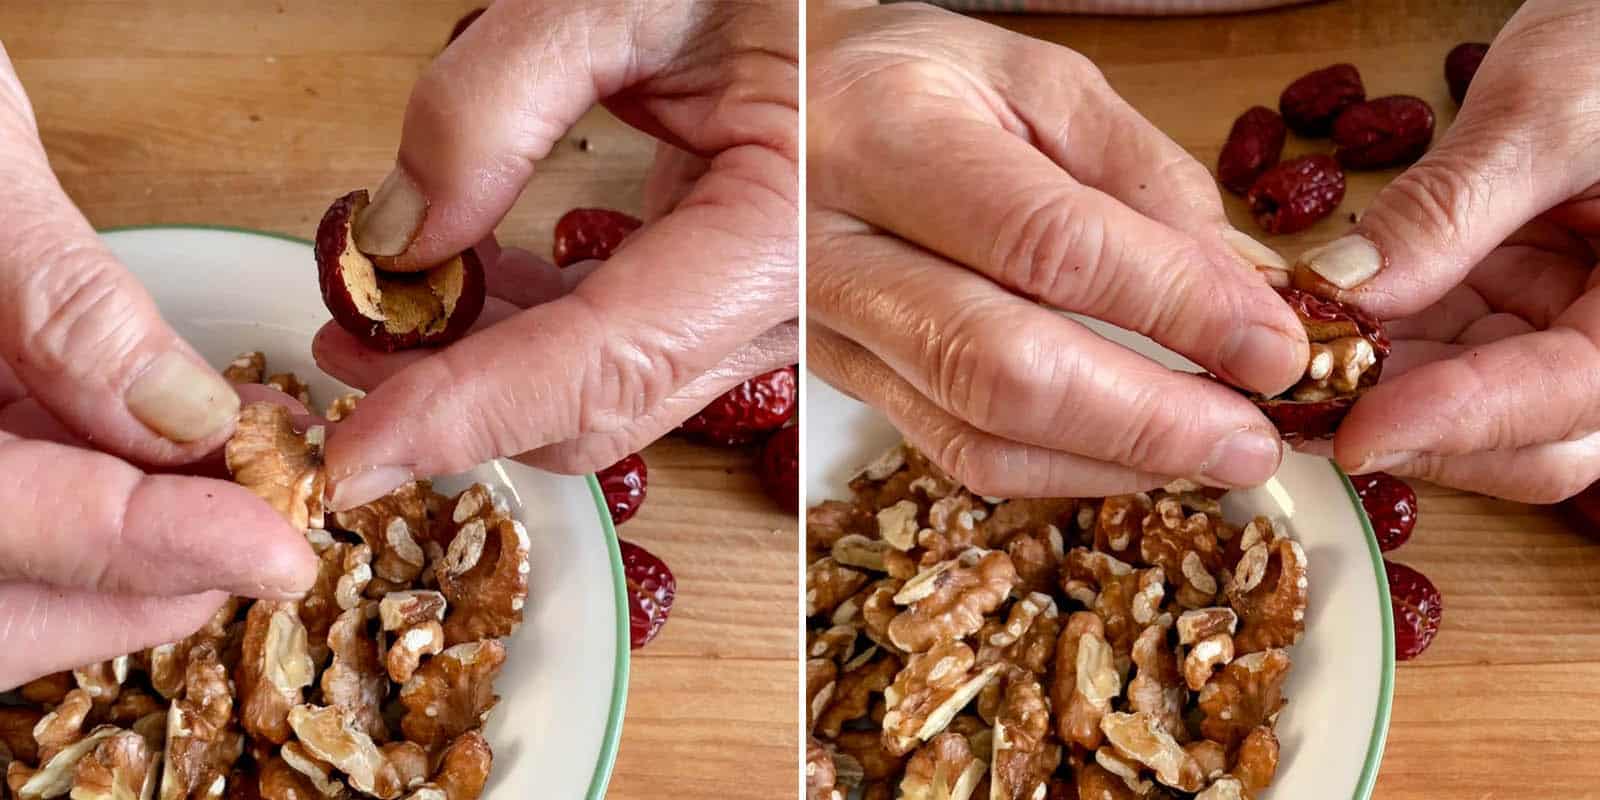 Stuffing dates with walnuts